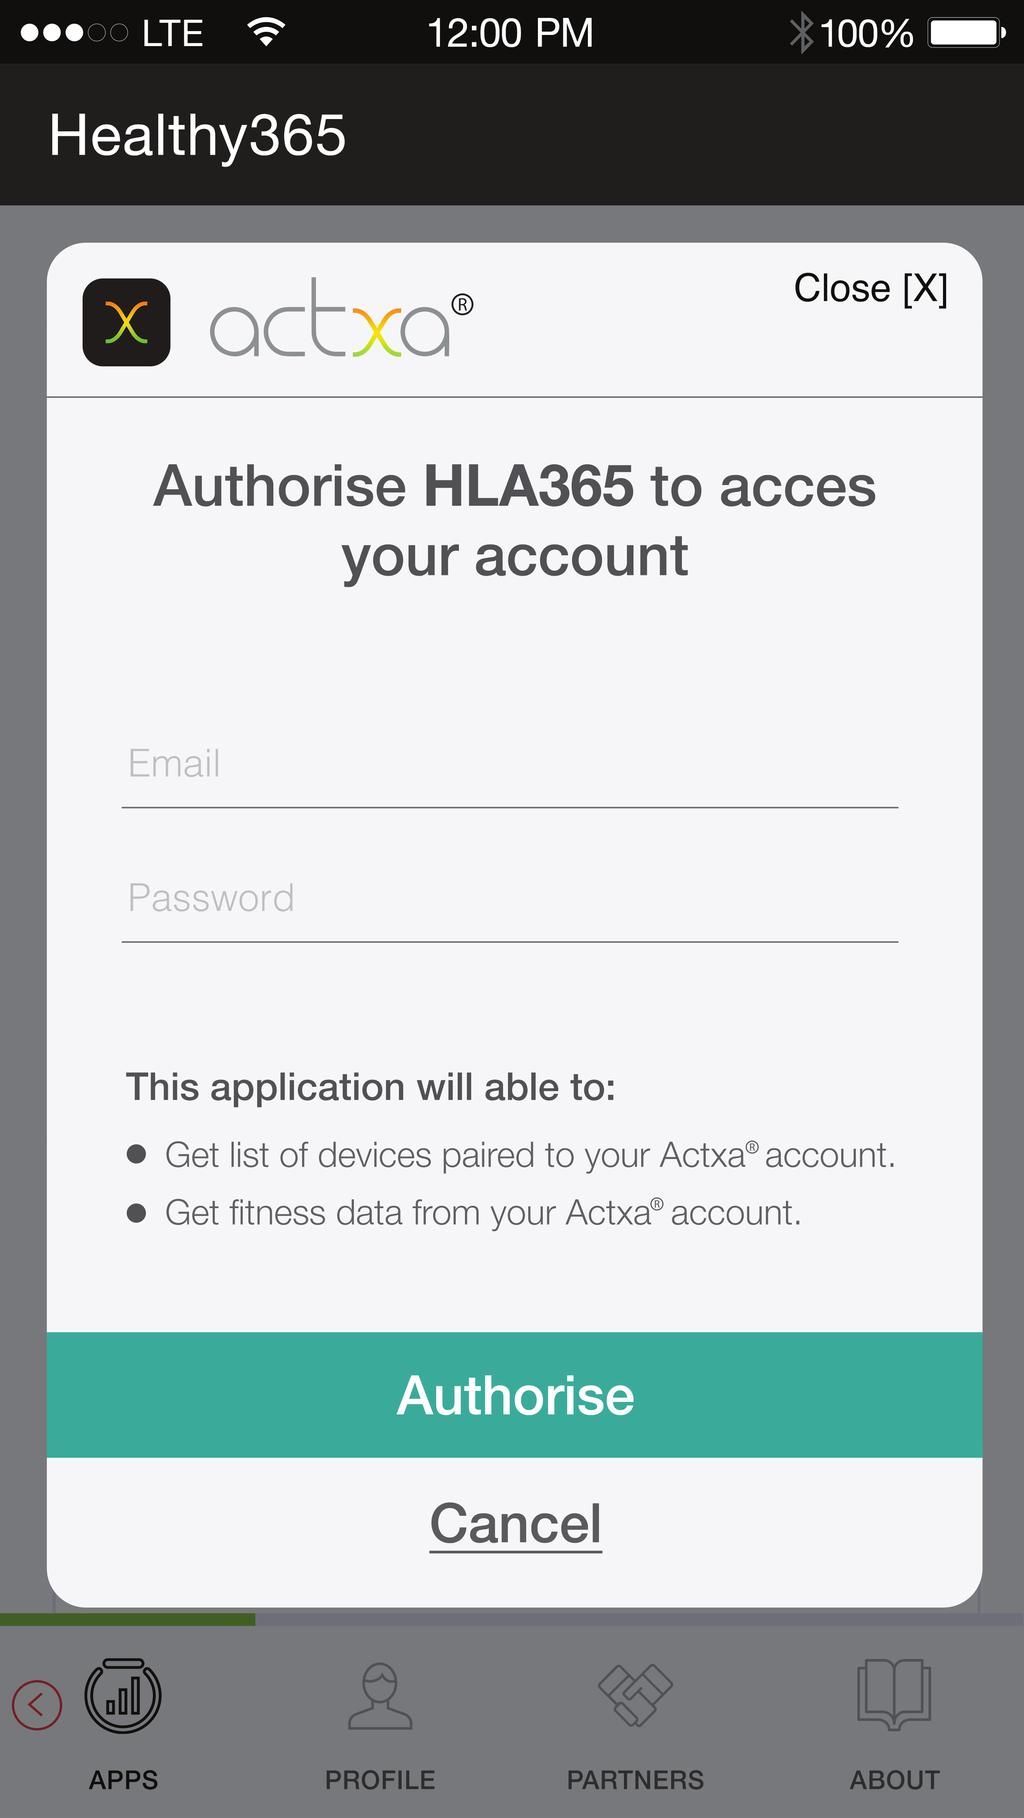 Actxa Log in to your Actxa account and tap on Authorise to allow access for the Healthy 365 mobile app.